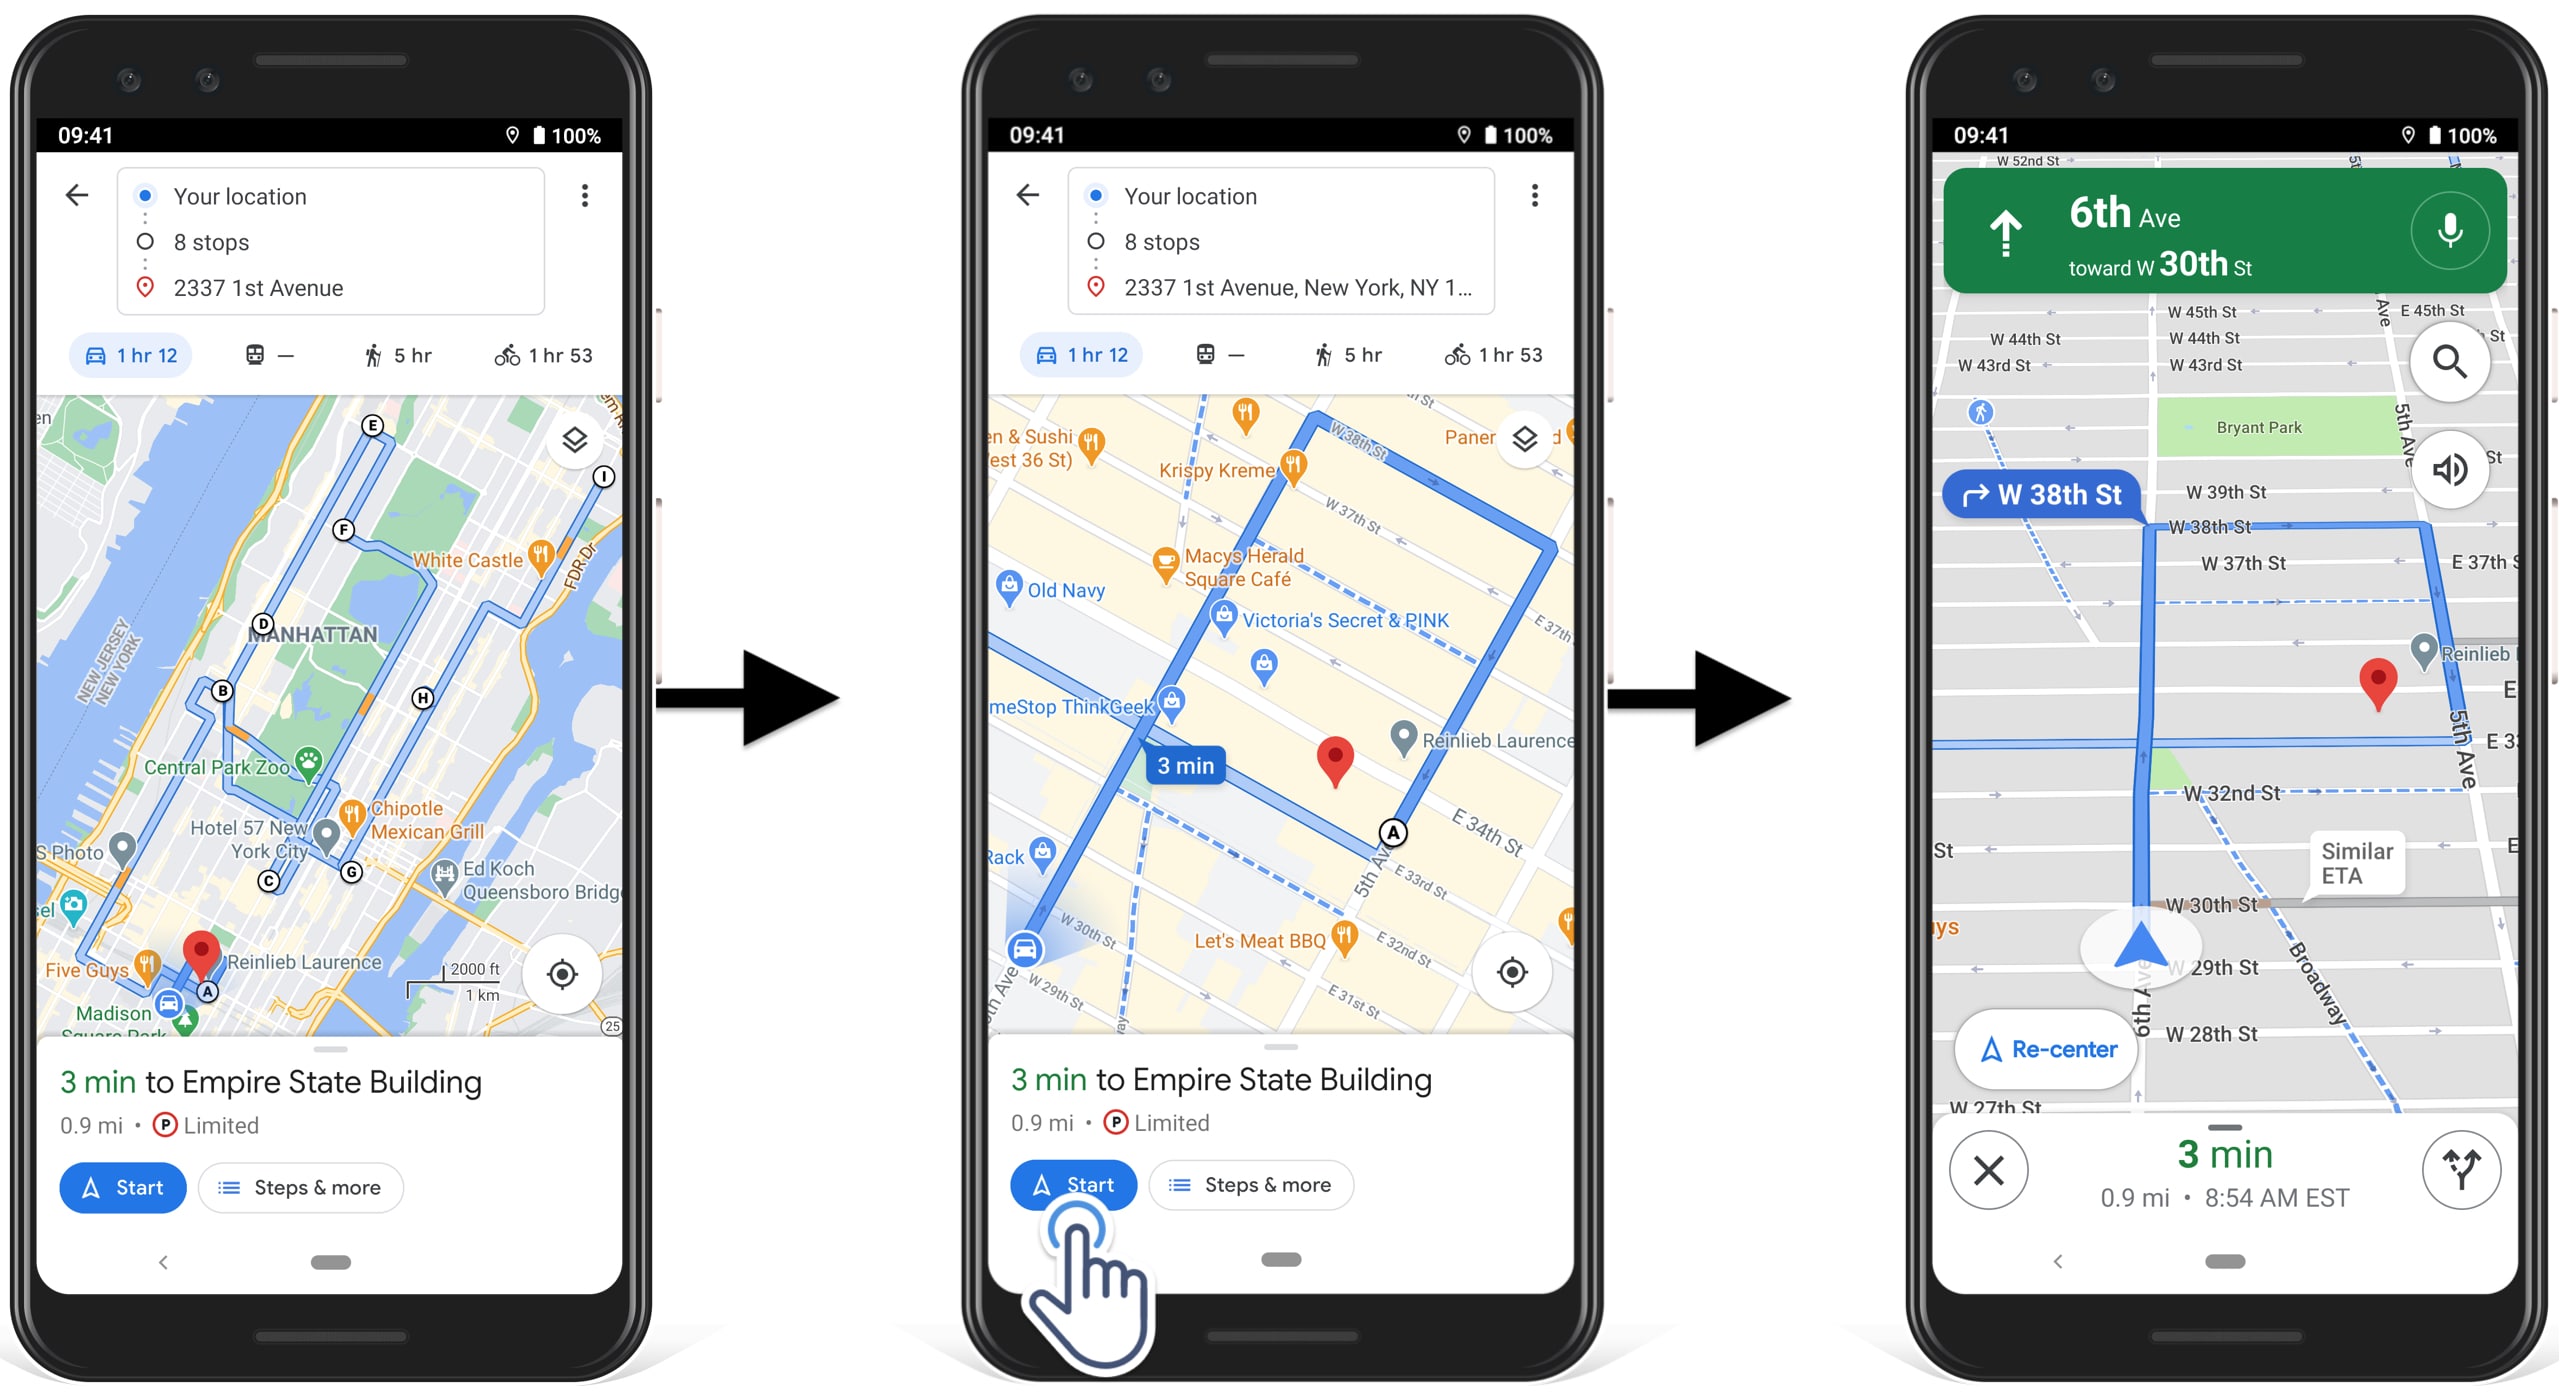 Using the Google Maps GPS Navigation to navigate a multi stop route on the Google Maps route planner app